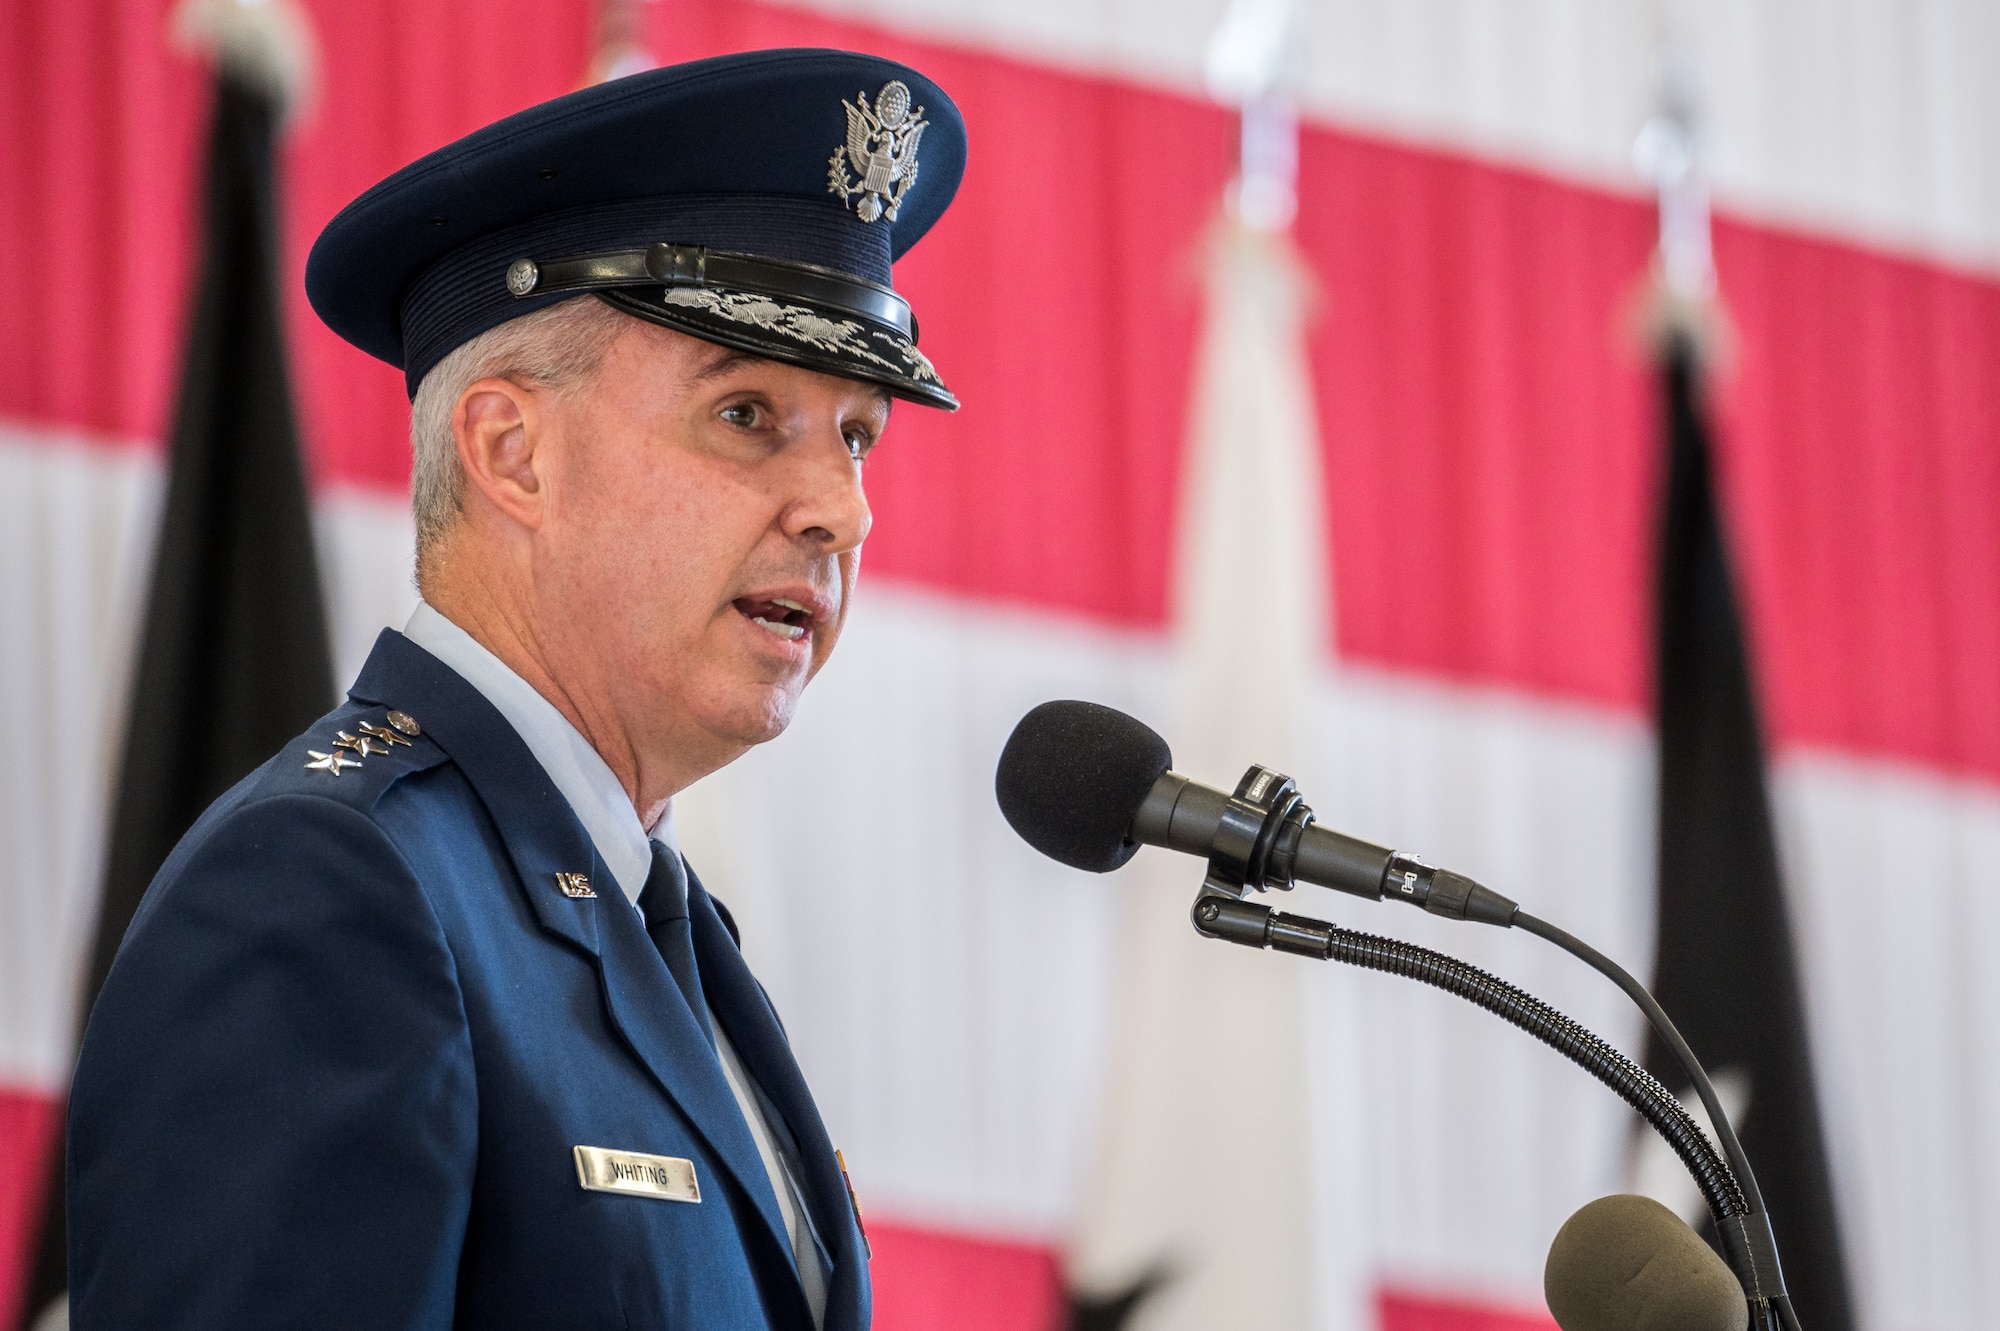 Lt. Gen. Stephen N. Whiting, first commander of the newly re-designated Space Operations Command, shares his vision for the U.S. Space Force’s new Field Command during a ceremony at Peterson Air Force Base, Colo., Oct 21, 2020.